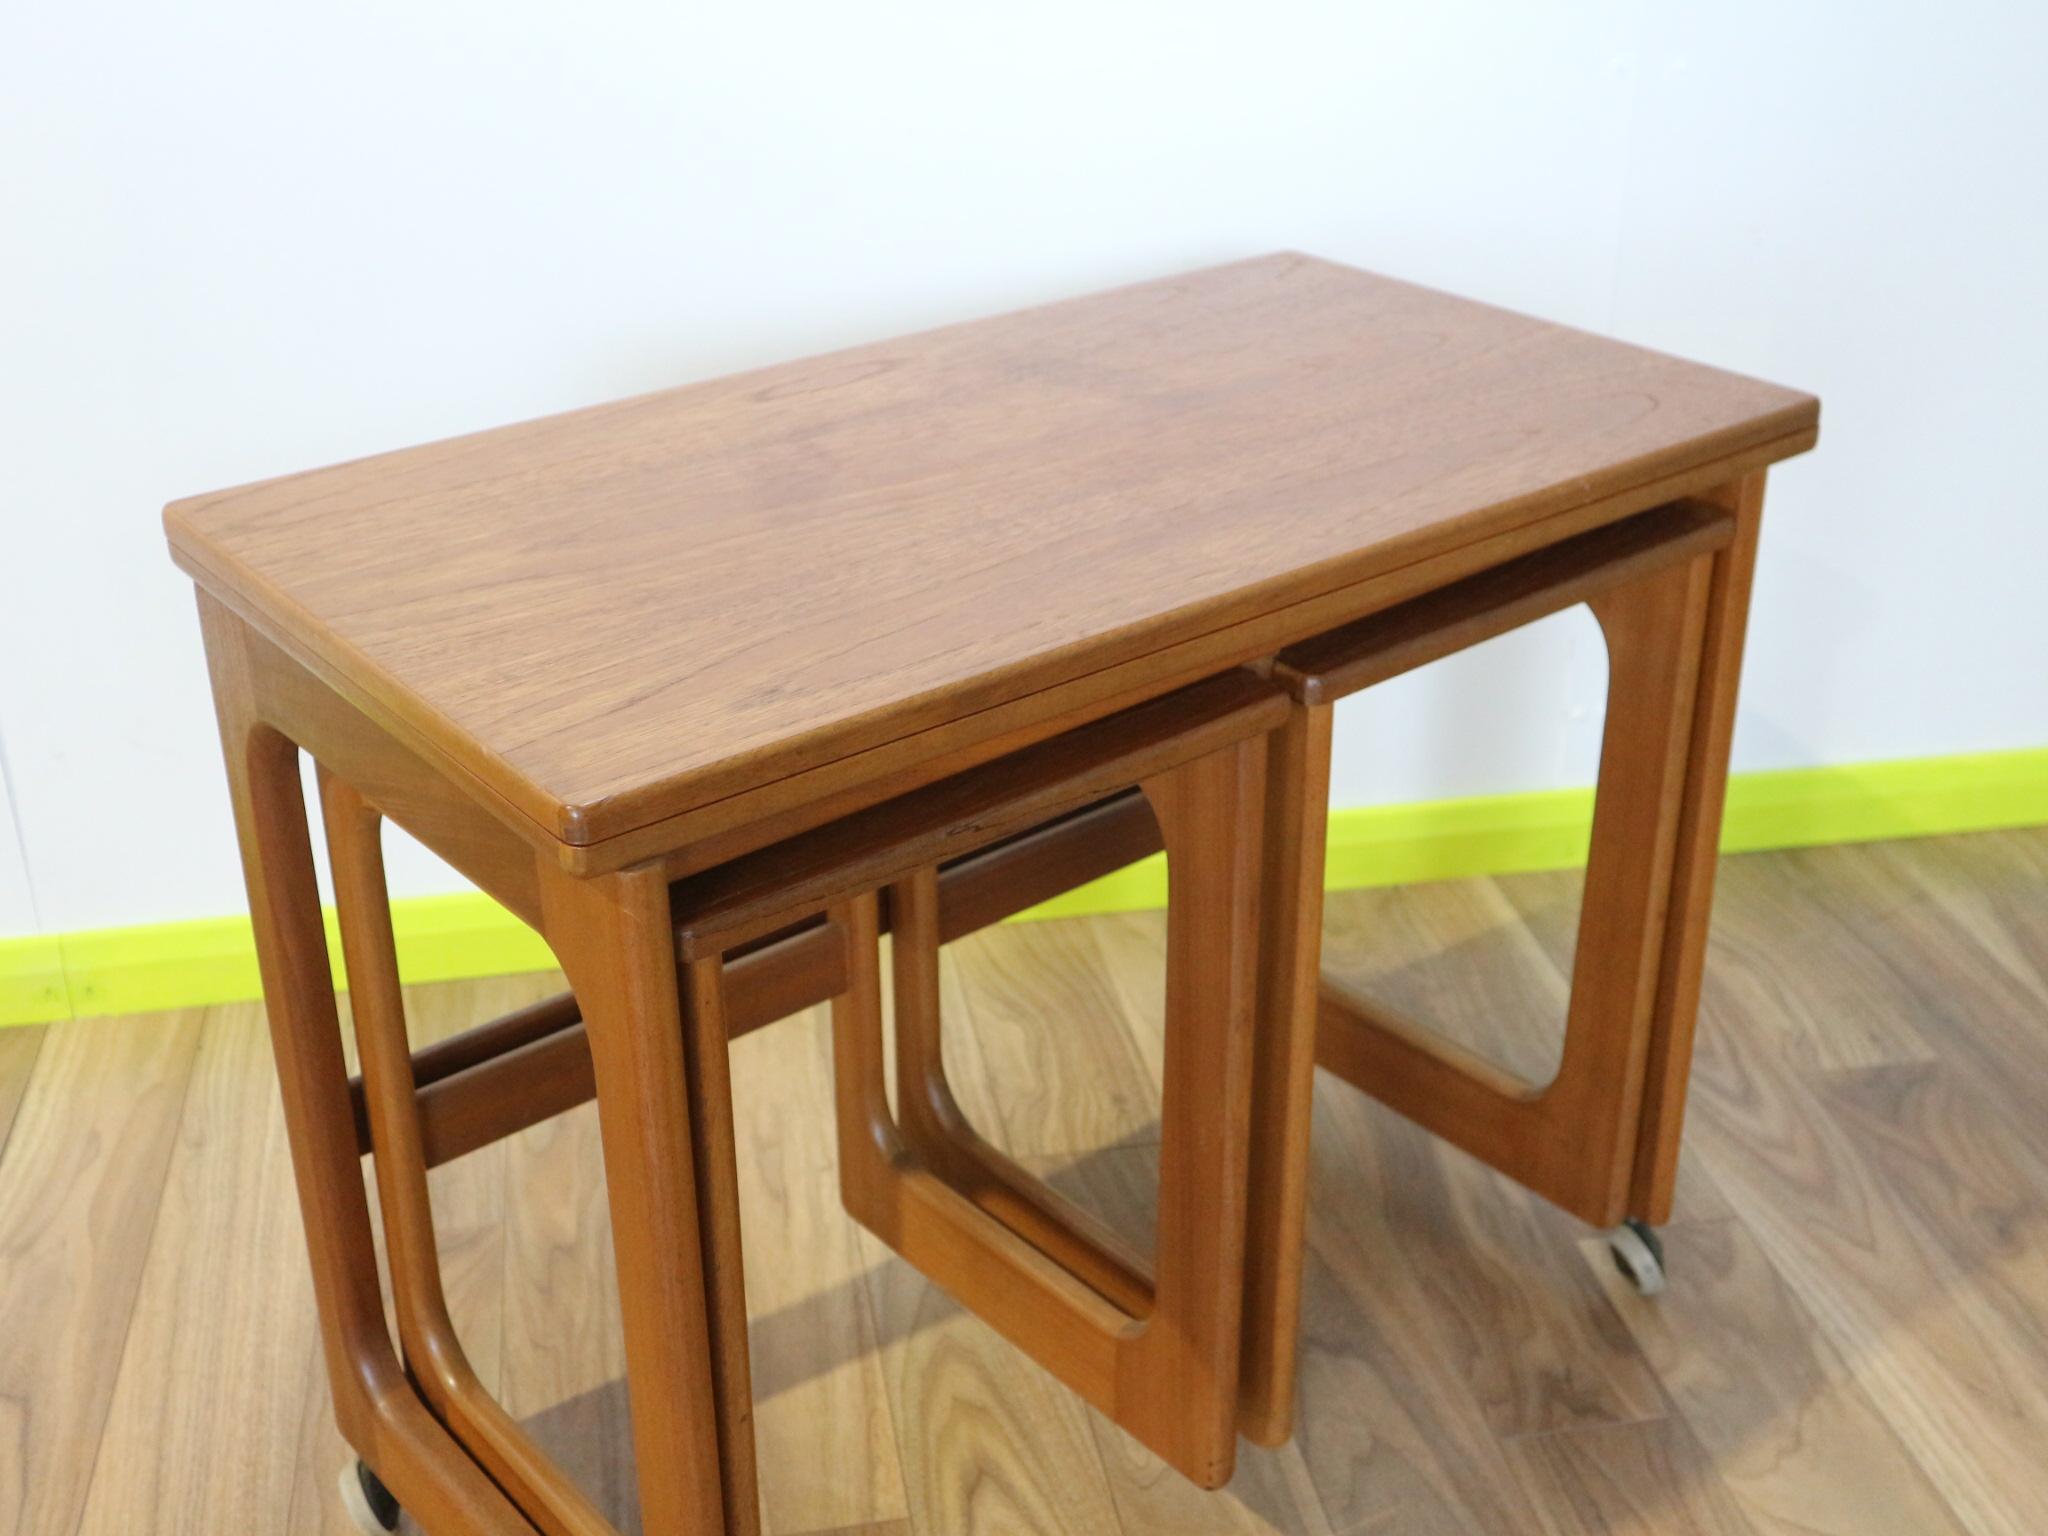 This striking nest of three tables by Scottish brand AH Mcintosh in teak is part of the Triform range. With distinctive mid century design, and a modular, extending table it can be used for a variety of occasions. This flexible unit tucks in neatly